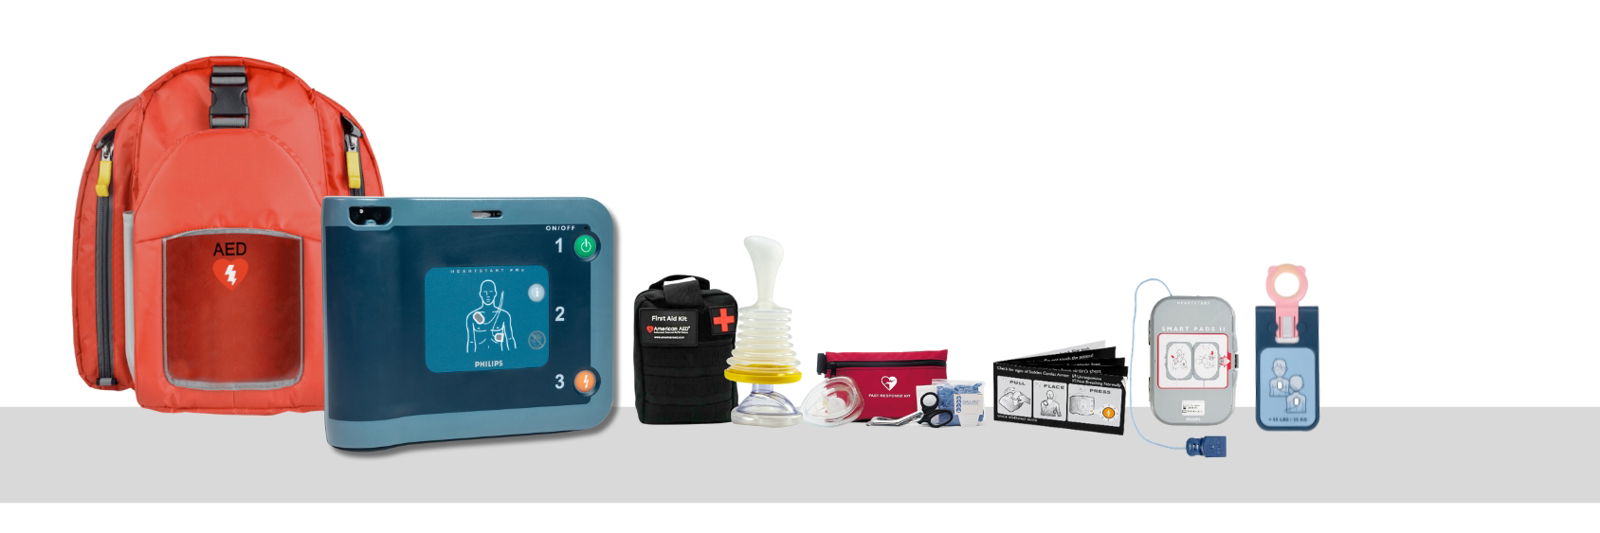 American AED Summer Camp First-Aid & AED Safety Package